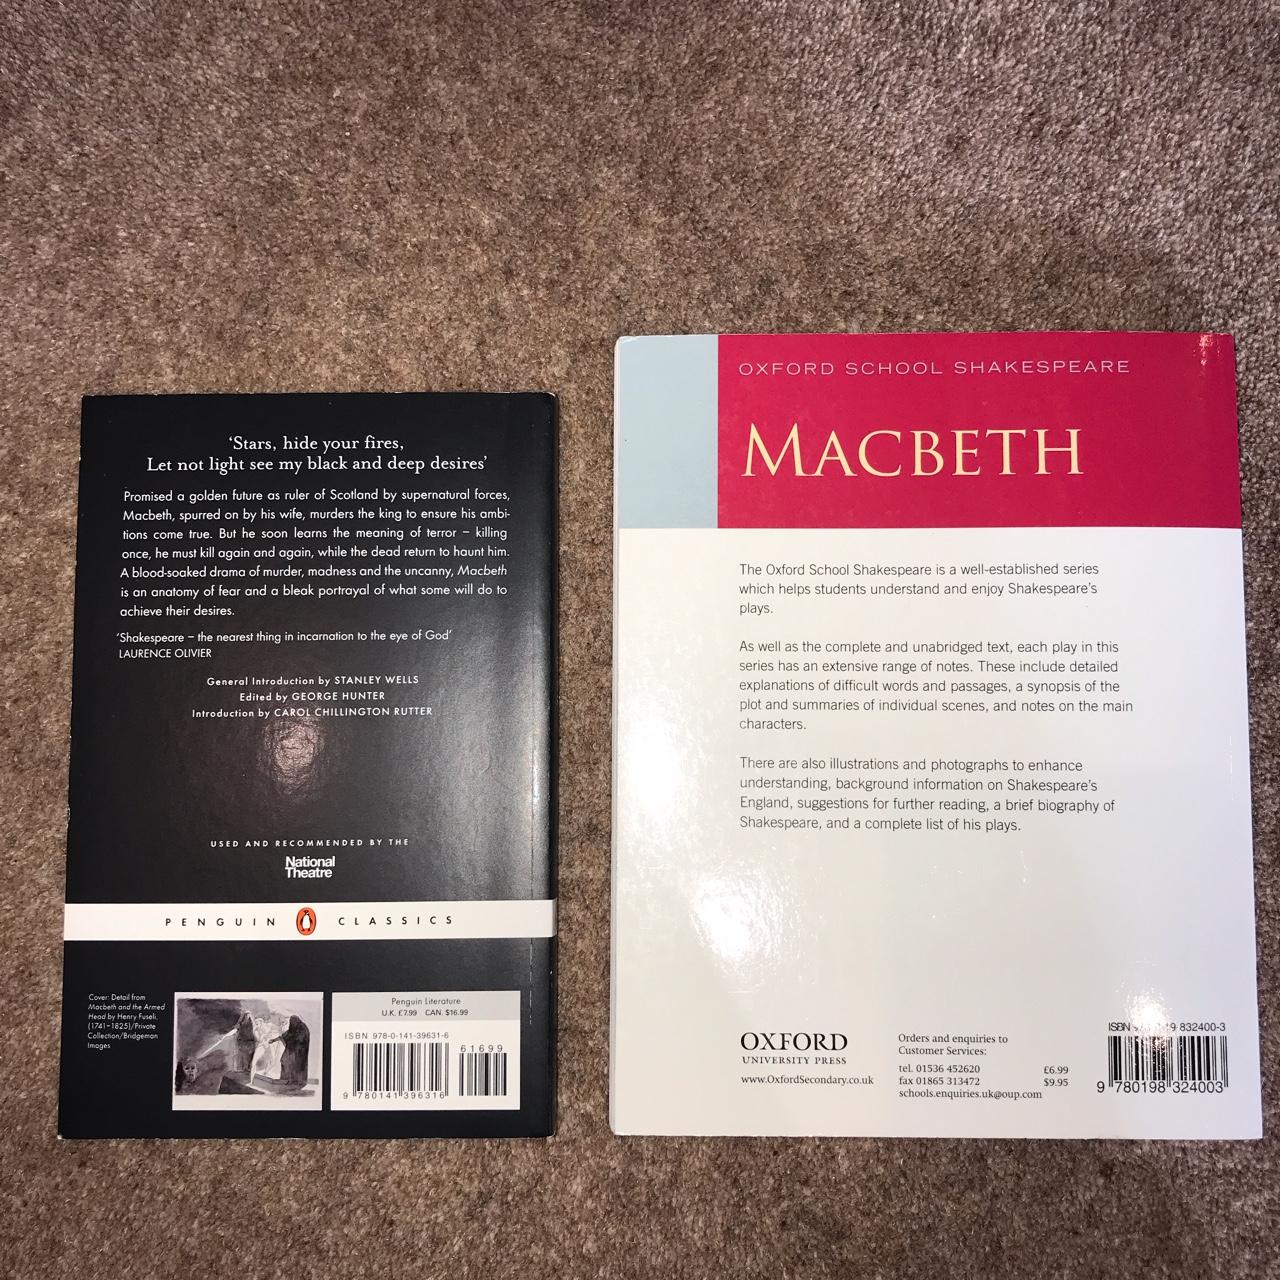 OXFORD SCHOOL SHAKESPEARE, MACBETH with annotations - Depop